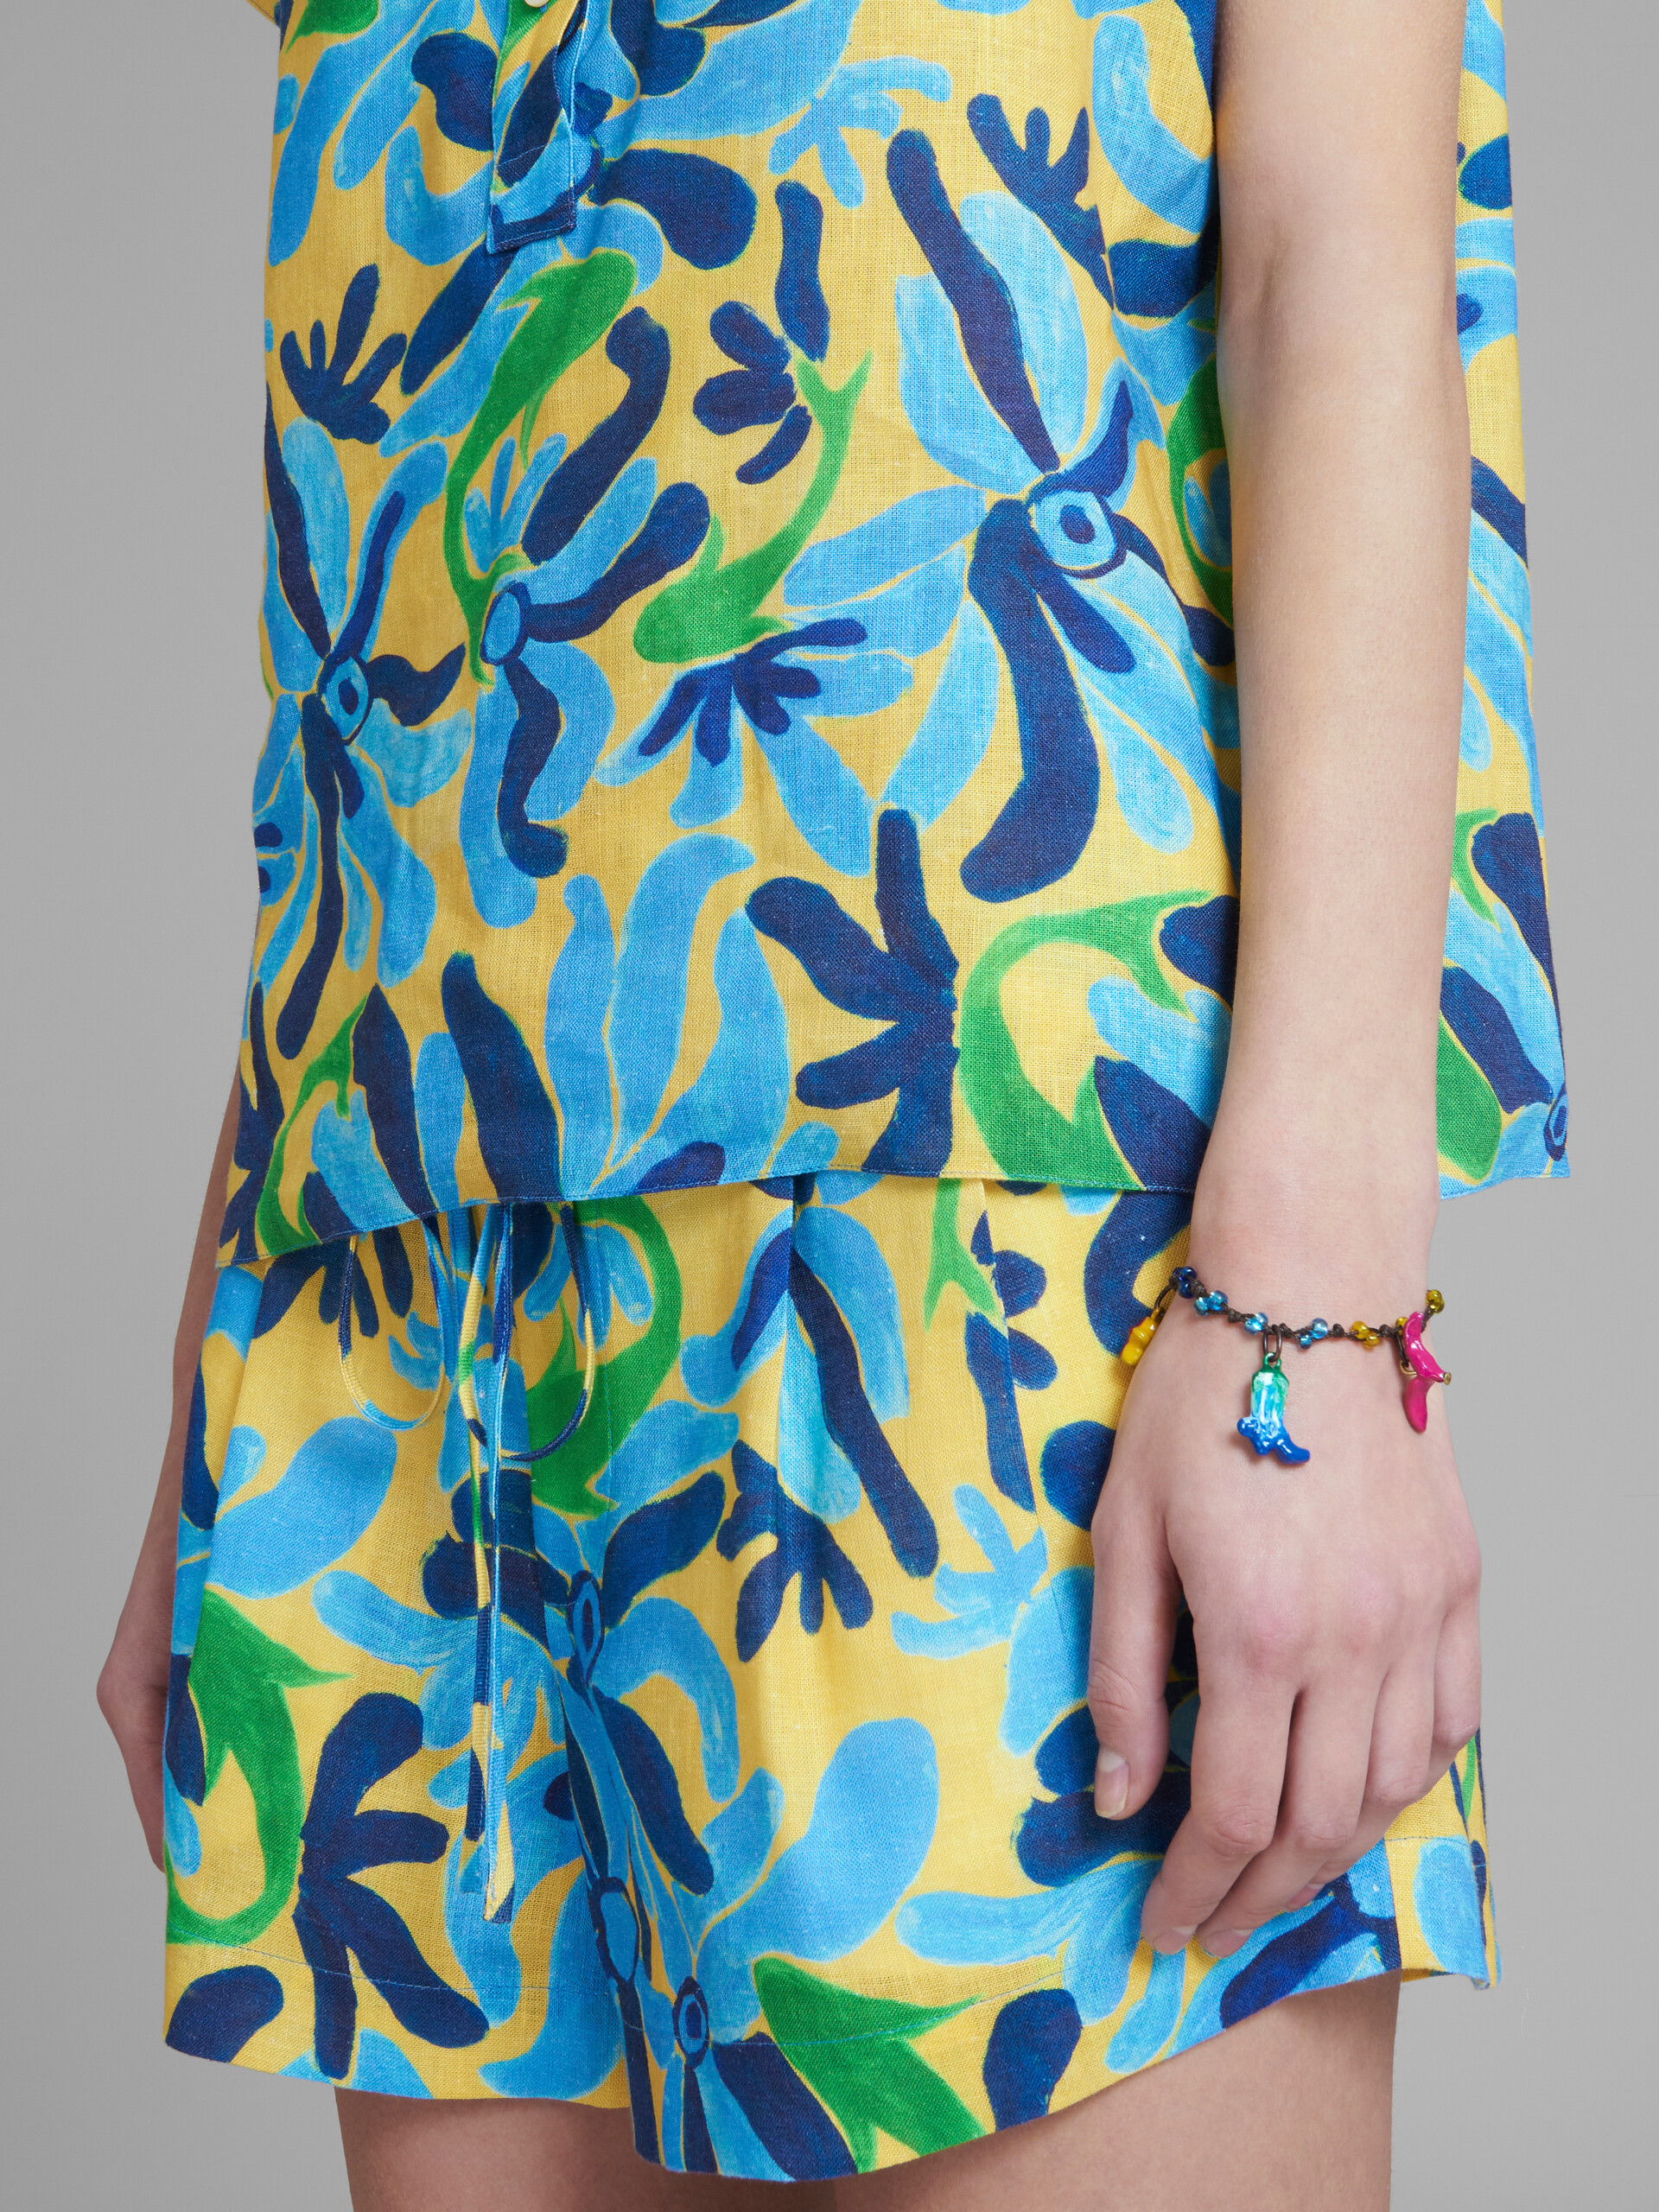 Marni x No Vacancy Inn - Bracelet with red blue and yellow pendants - Bracelets - Image 2